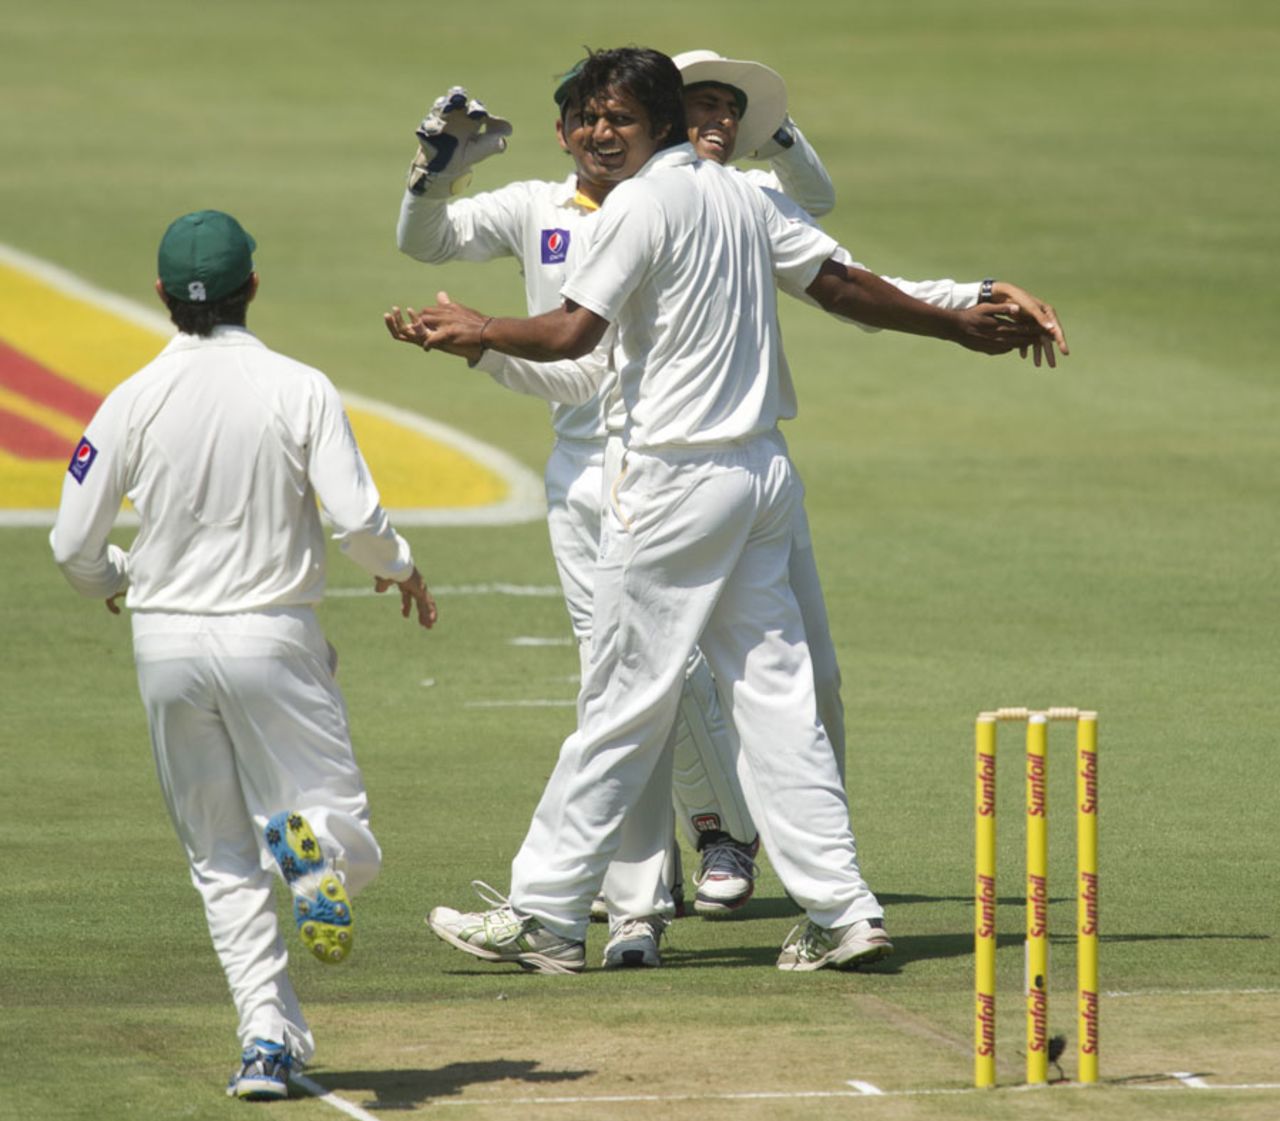 Rahat Ali celebrates his first wicket in Tests, South Africa v Pakistan, 3rd Test, Centurion, 1st day, February 22, 2013